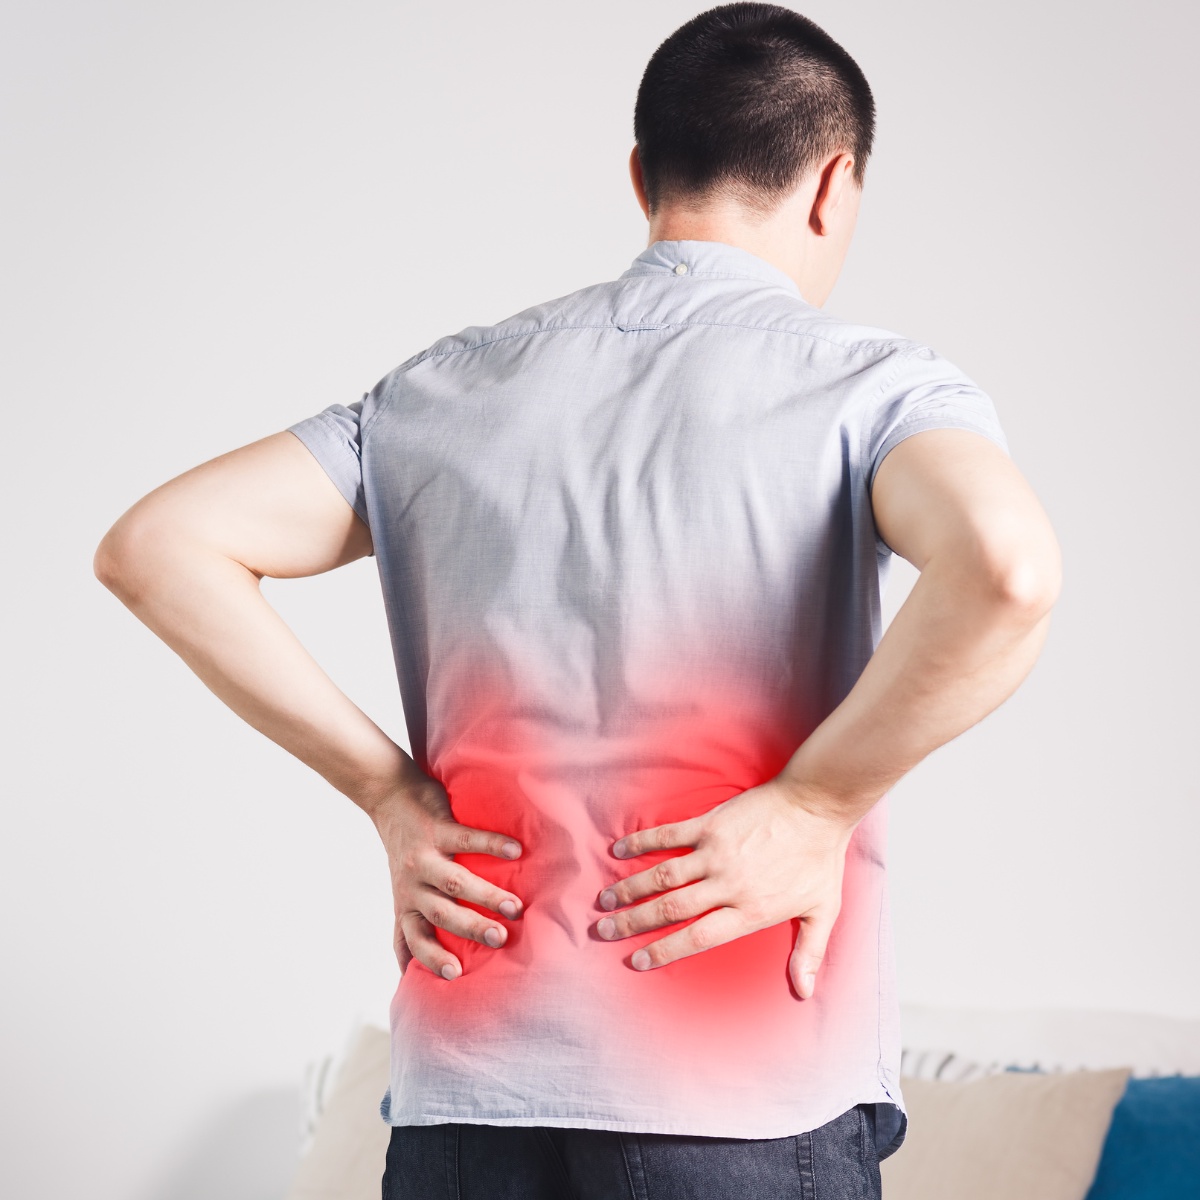 Easy Ways to Relieve Sciatica Pain: A Guide for Everyone